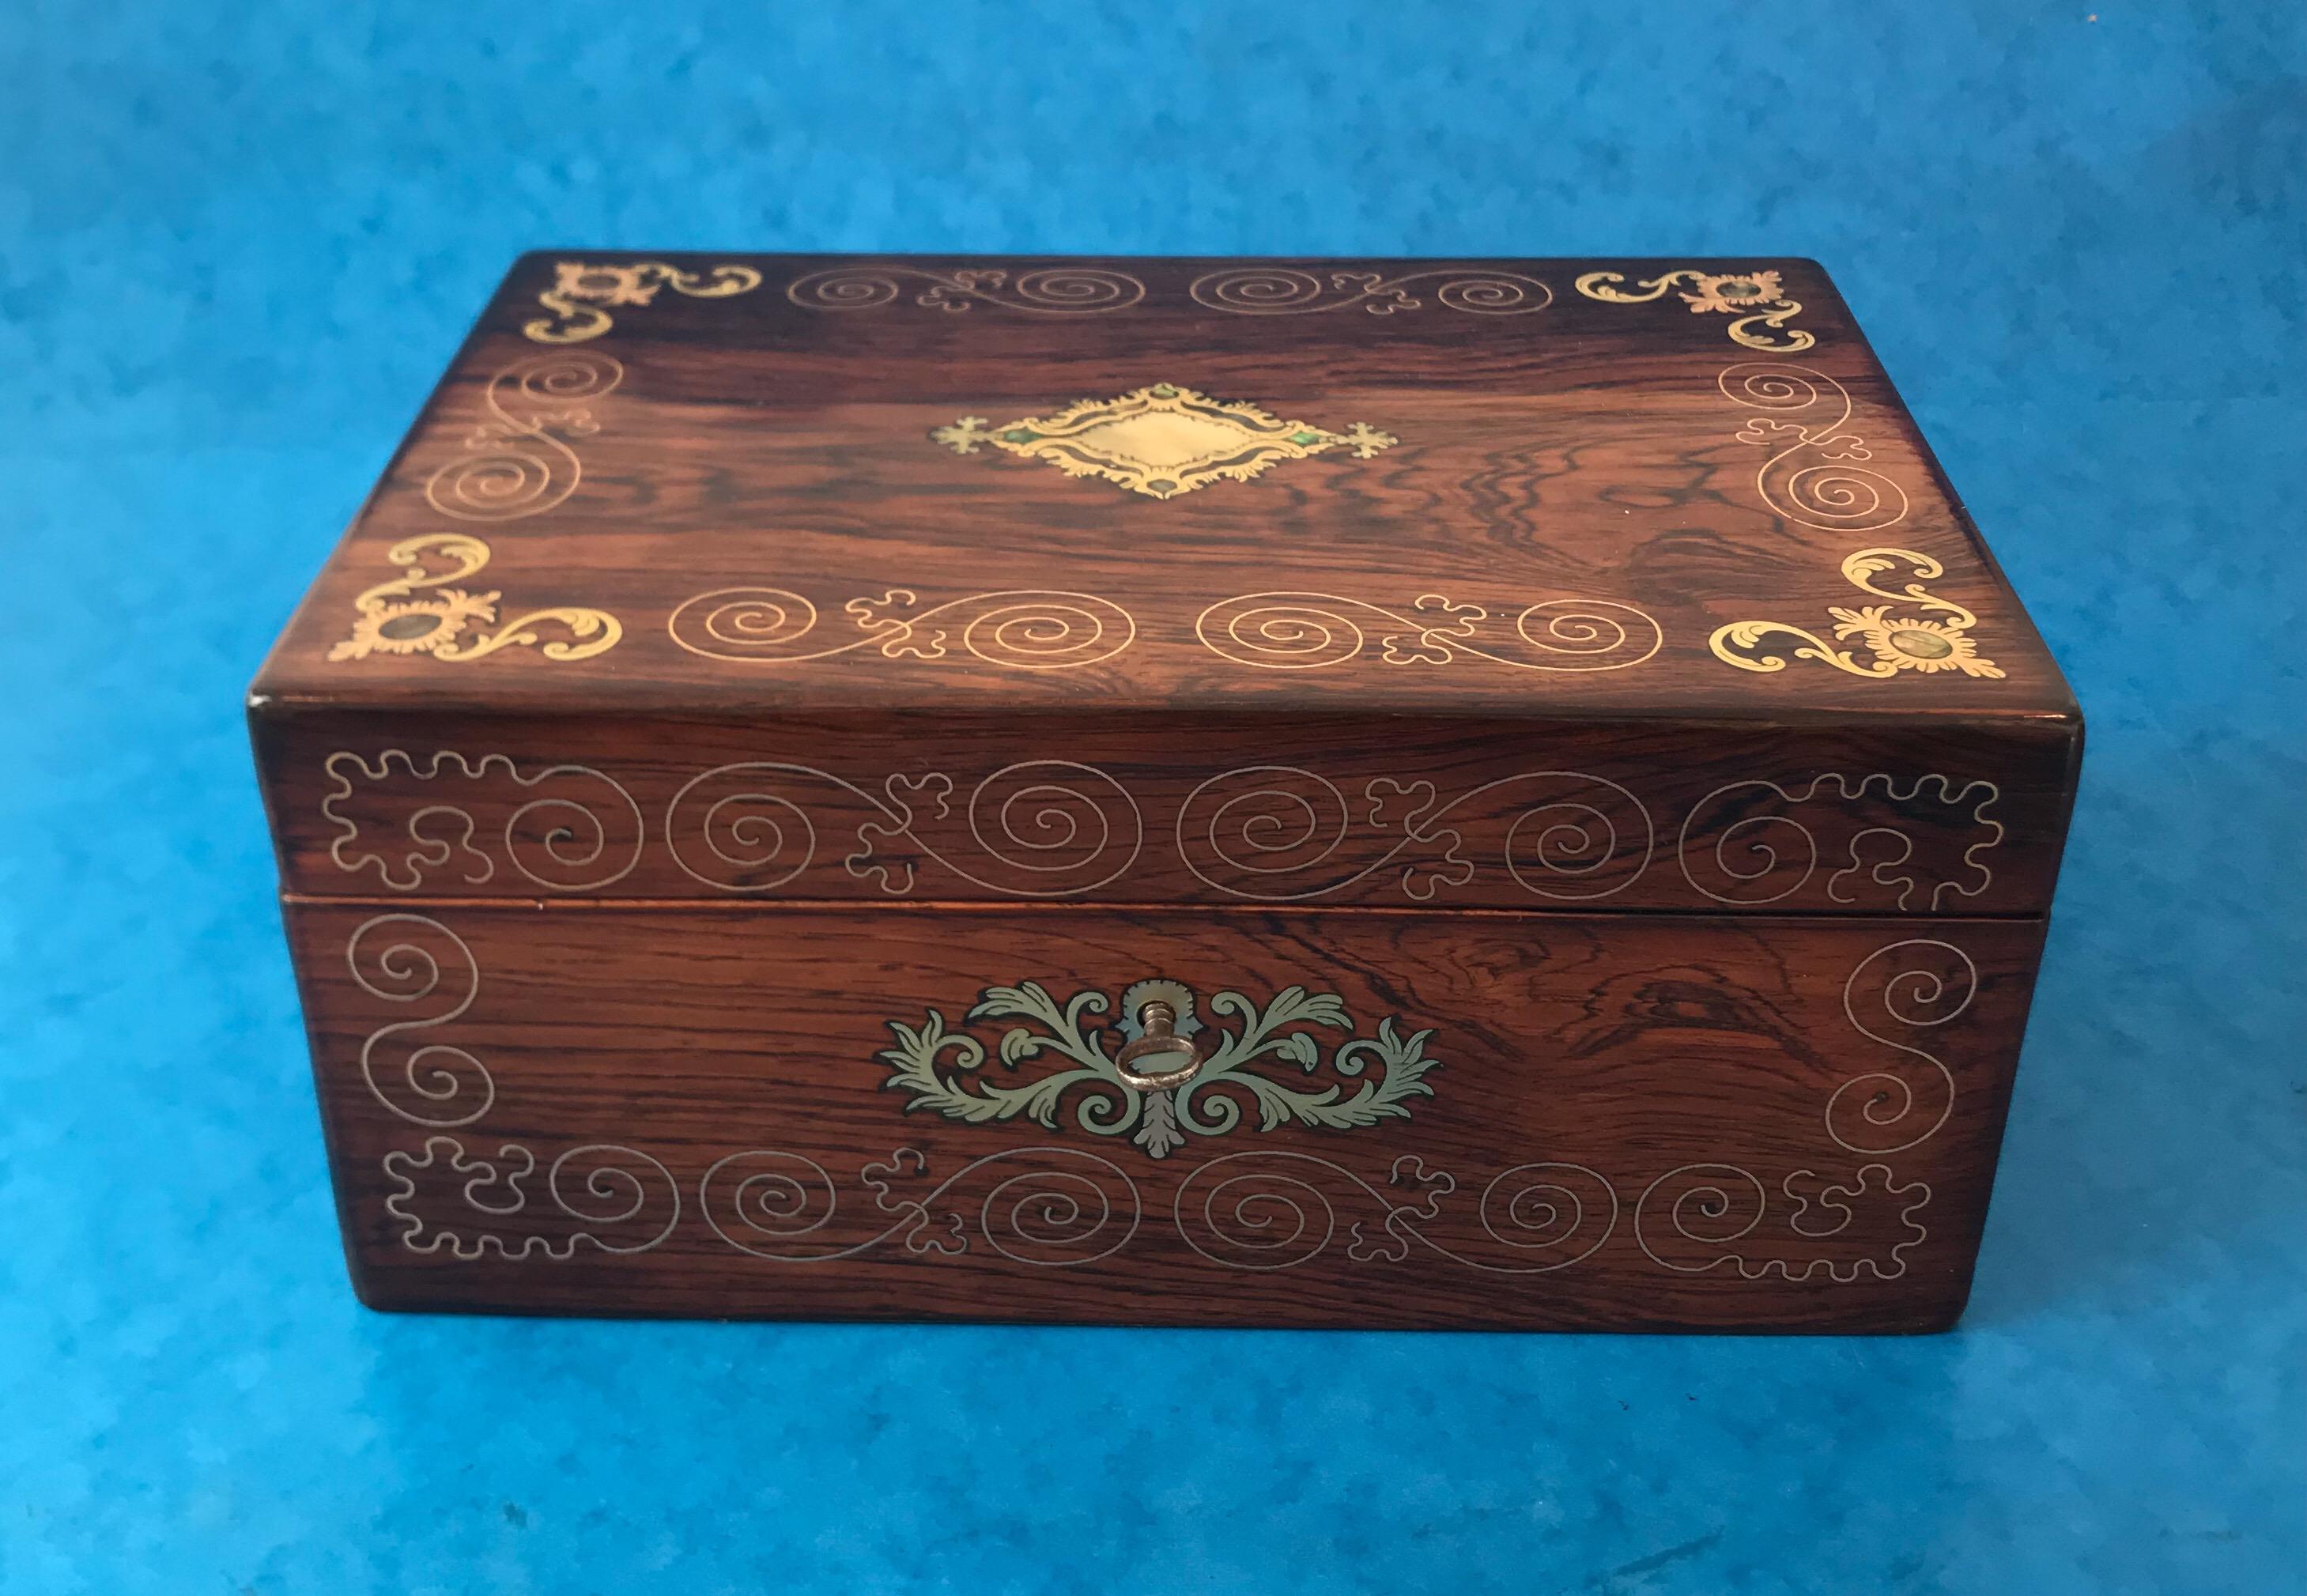 An exquisite Victorian rosewood jewelry box, the jewelry box dates back to 1850. It’s inlaid with brass patterned swirls and swags with inlaid mother of pearl to each centre. The jewelry box houses its original elaborate red interior to the back of